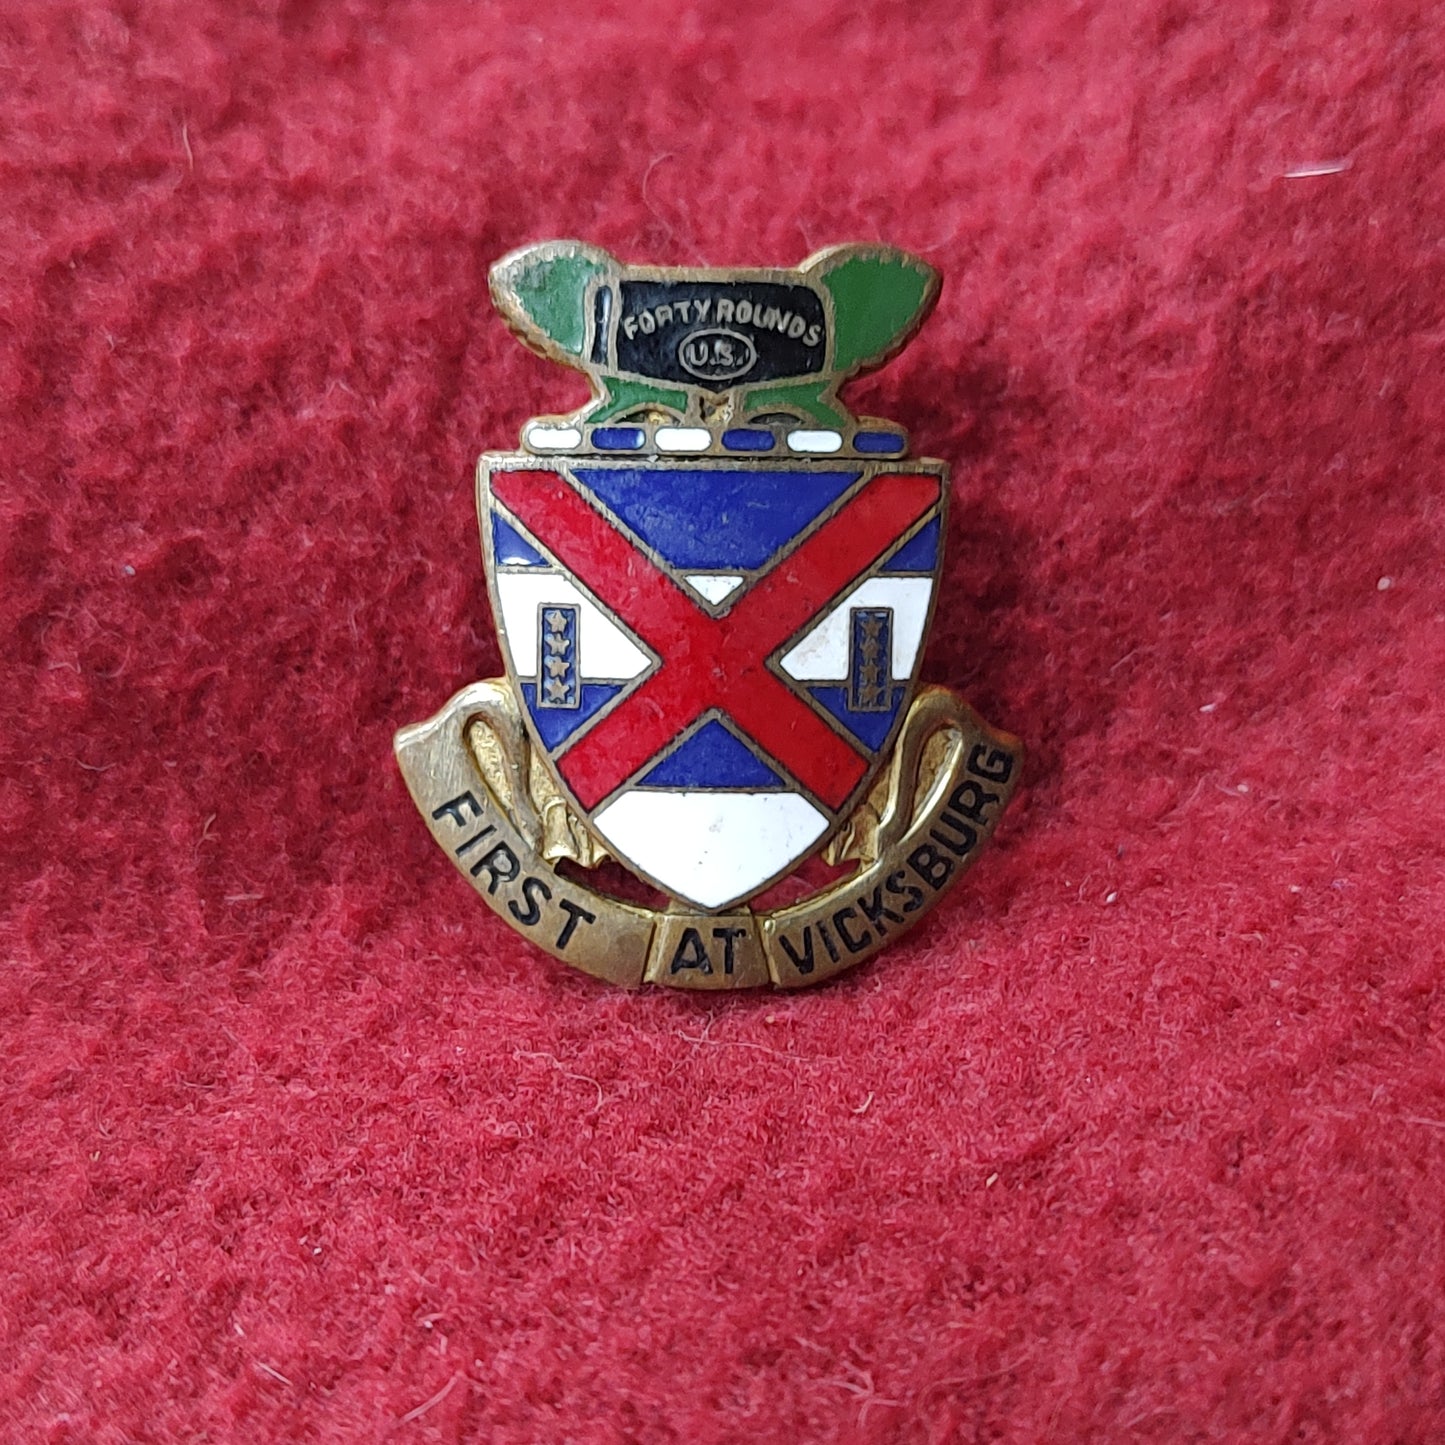 VINTAGE US Army 13th INFANTRY
Unit Crest Pin (11o77)